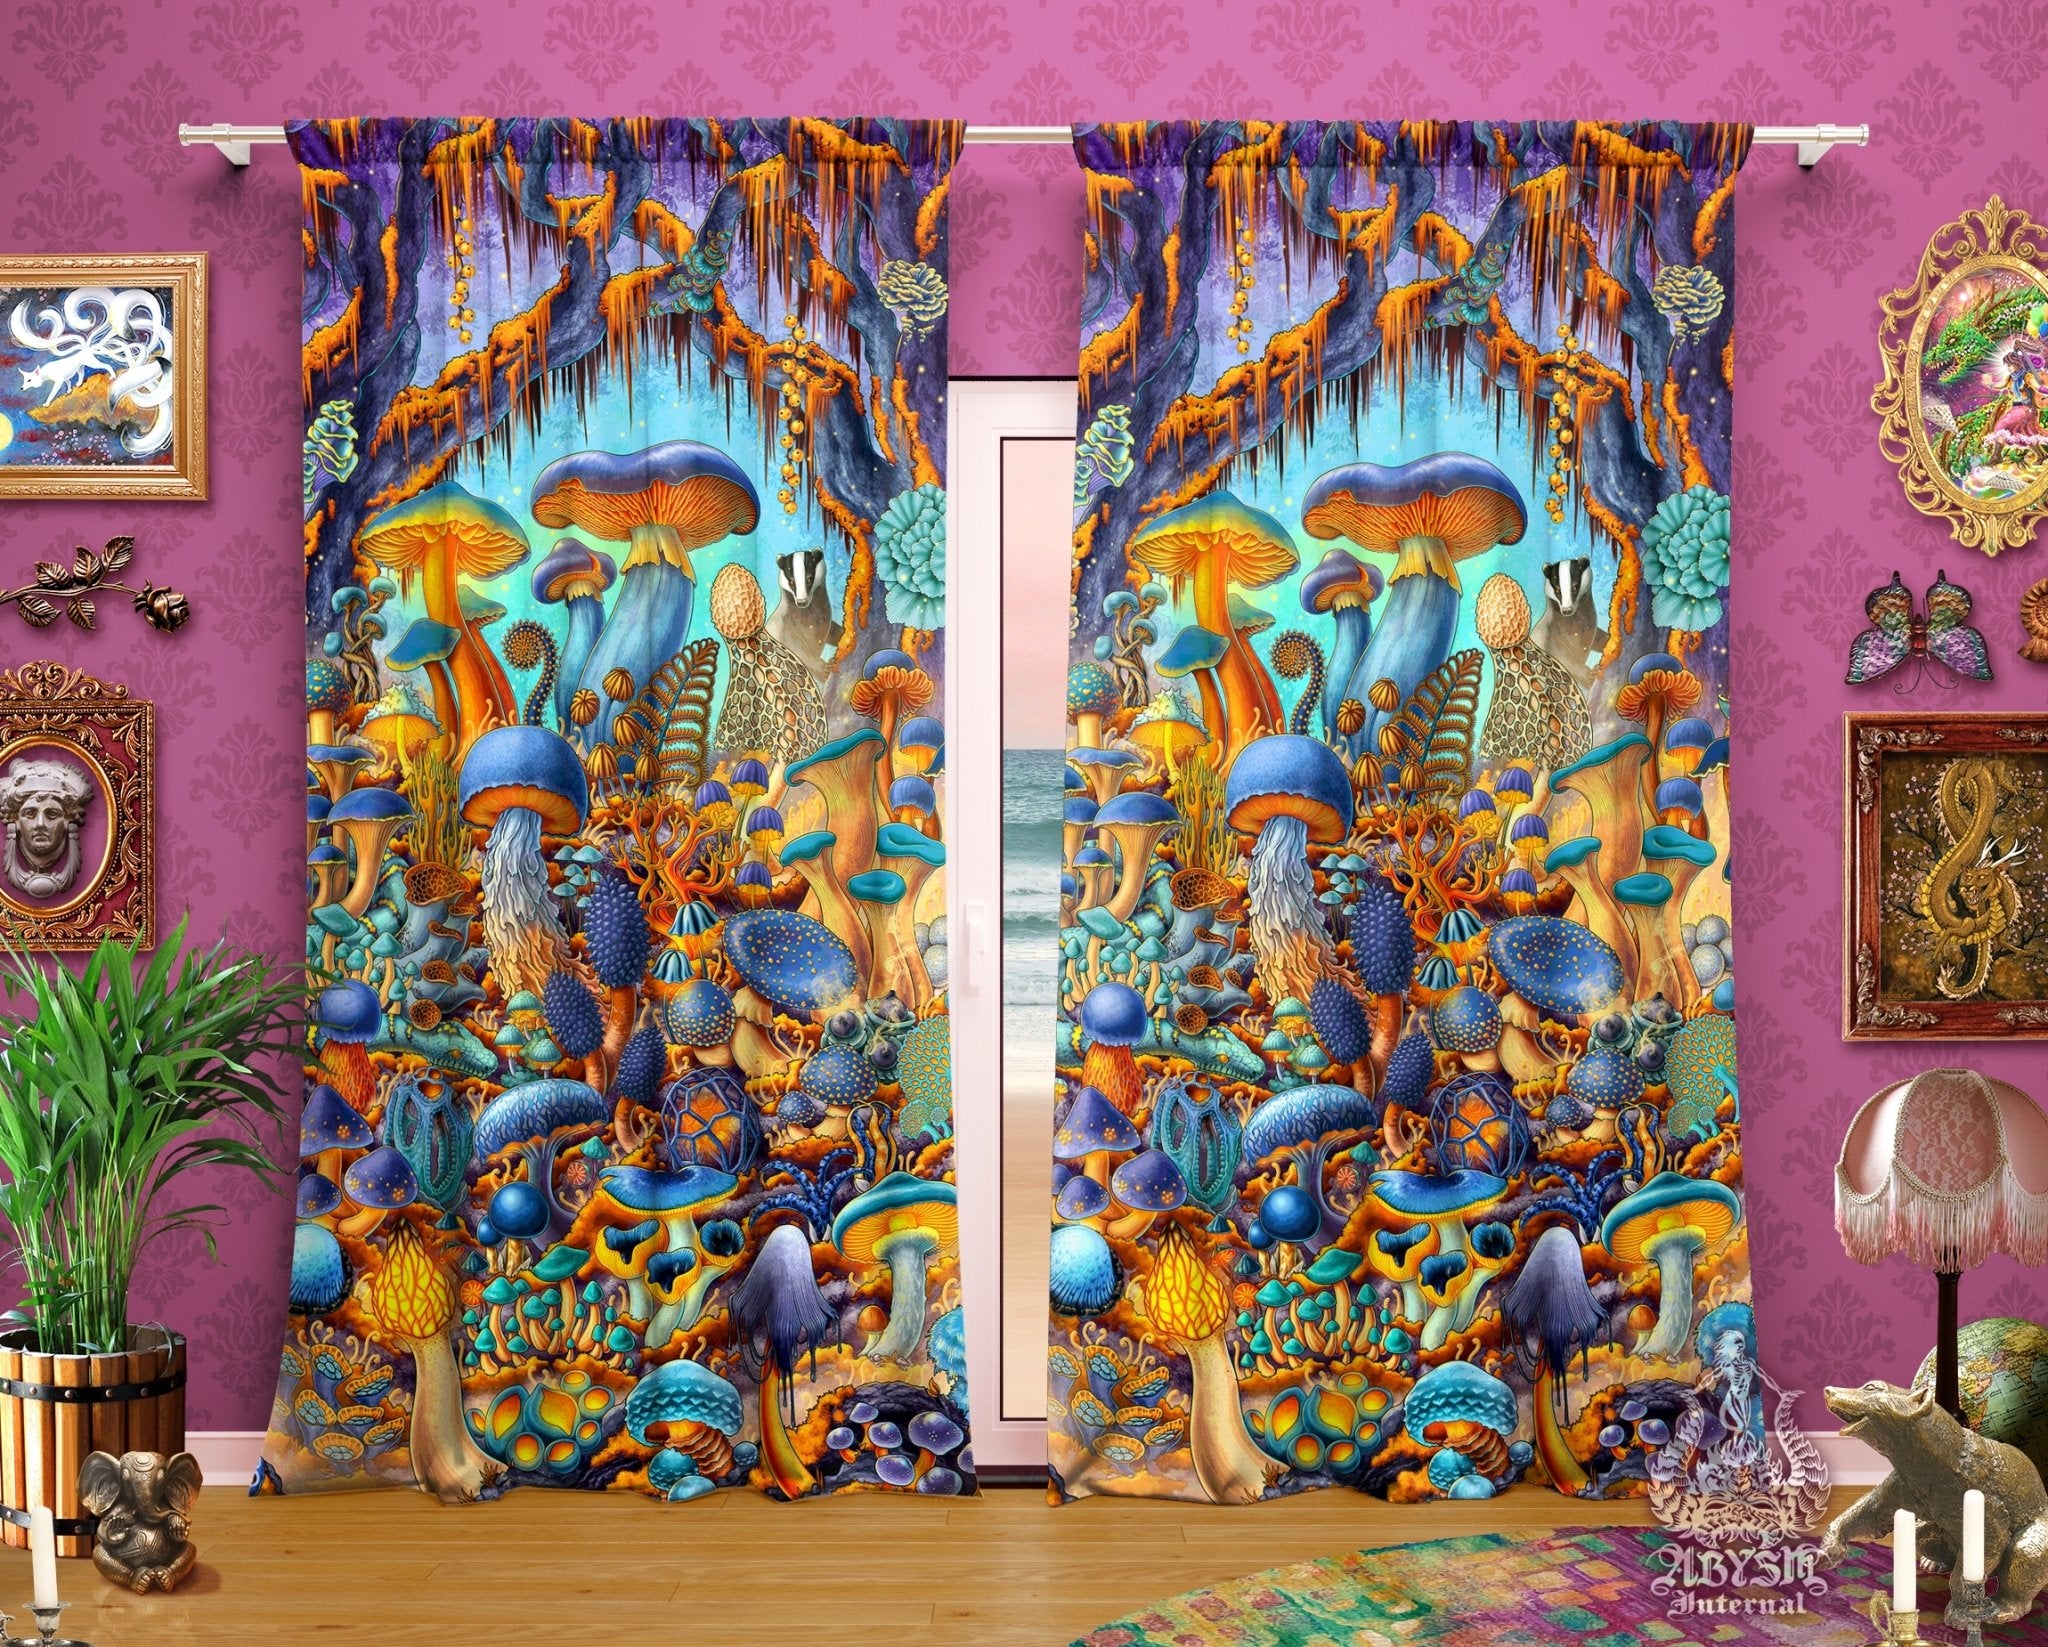 Mushrooms Blackout Curtains, Long Window Panels, Micology Art Print, Indie Shop, Home and Kids Room Decor - Magic Shrooms, Cyan and Gold - Abysm Internal